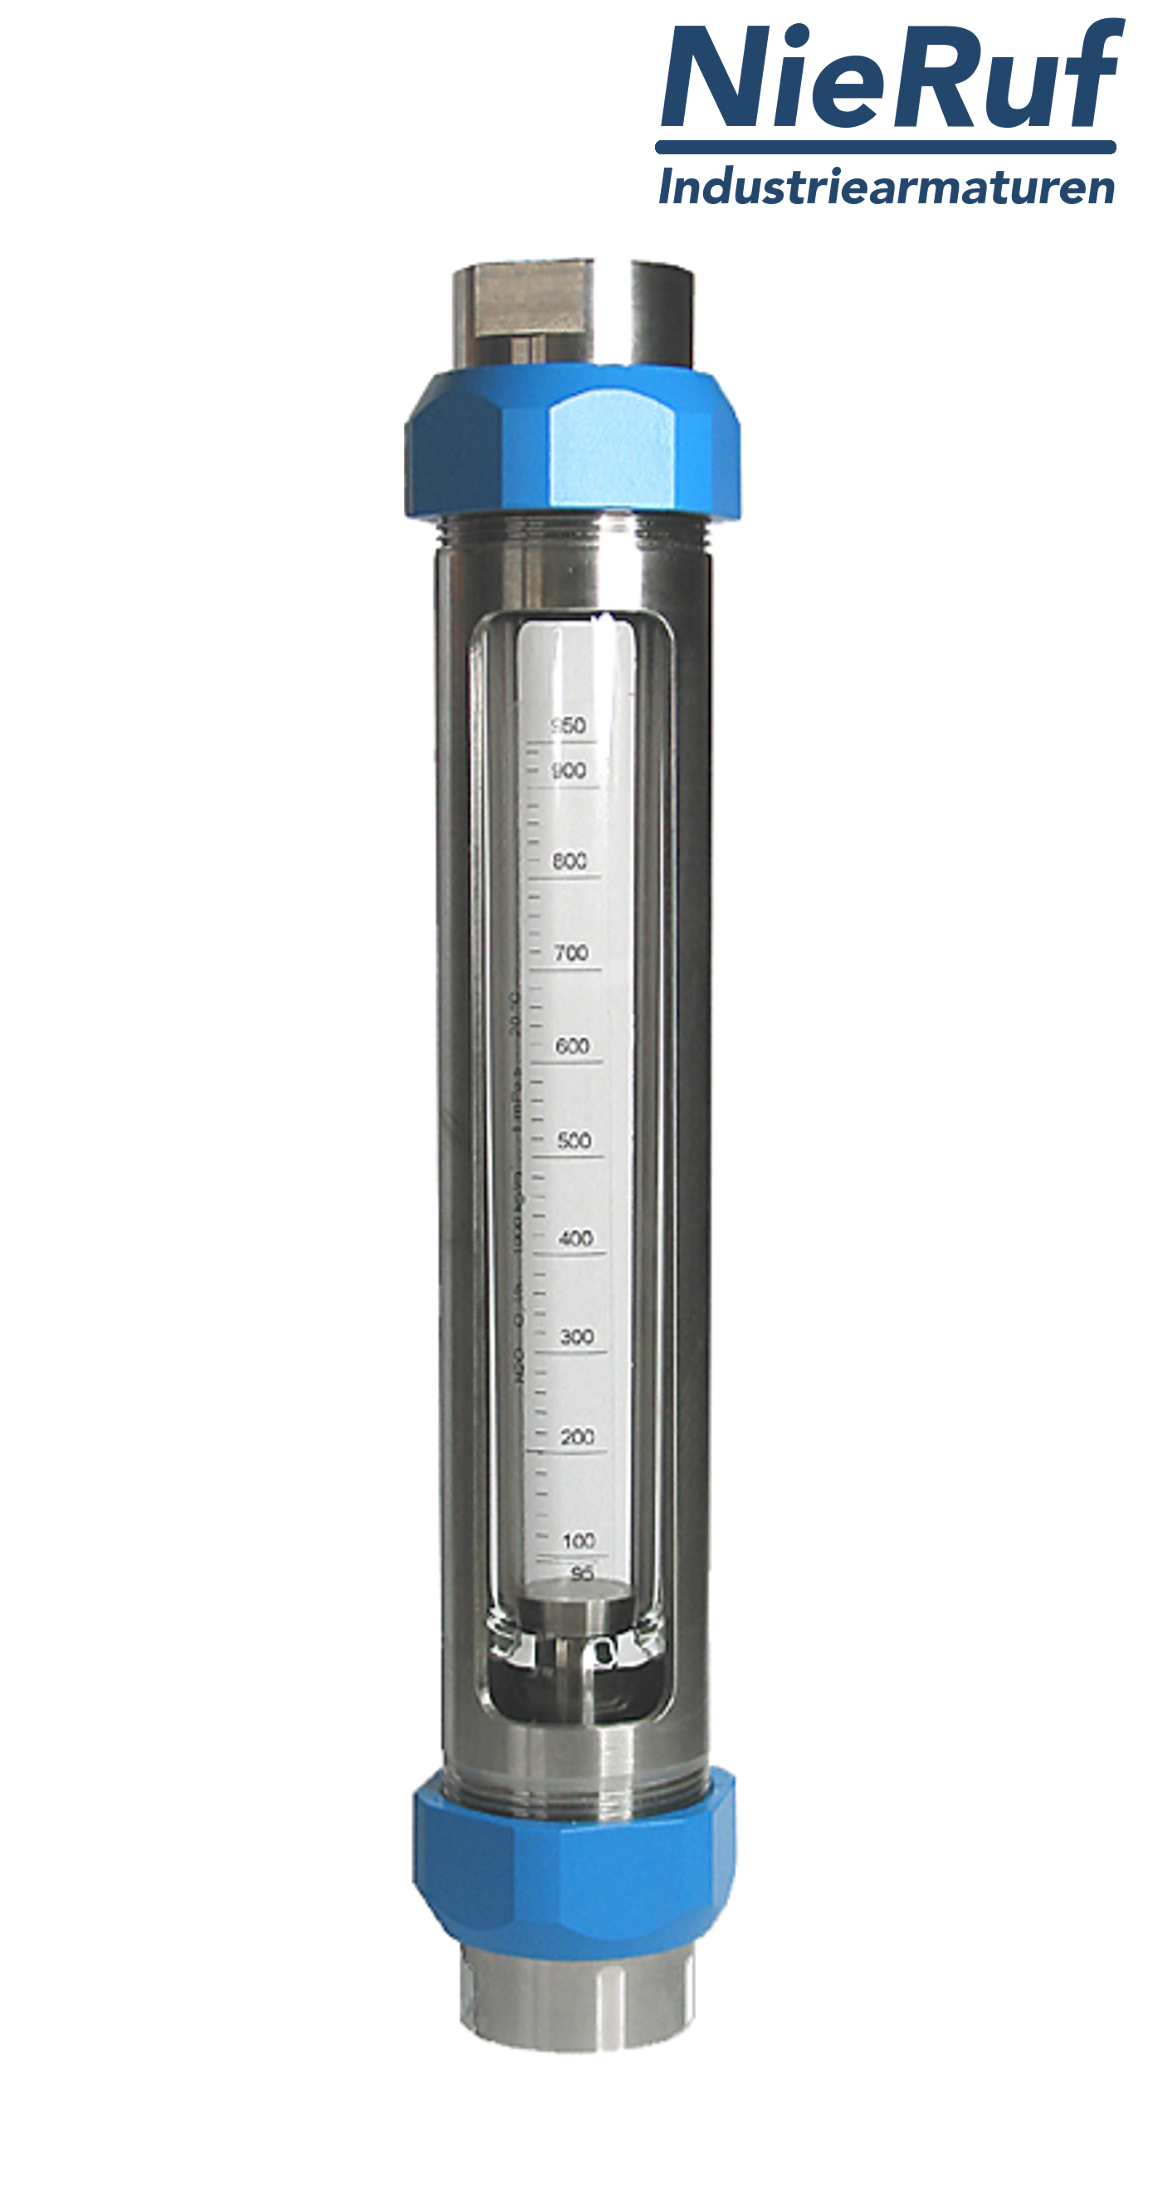 Variable area flowmeter stainless steel + borosilicate 1/2" inch 5.0 - 50.0 l/h water FKM